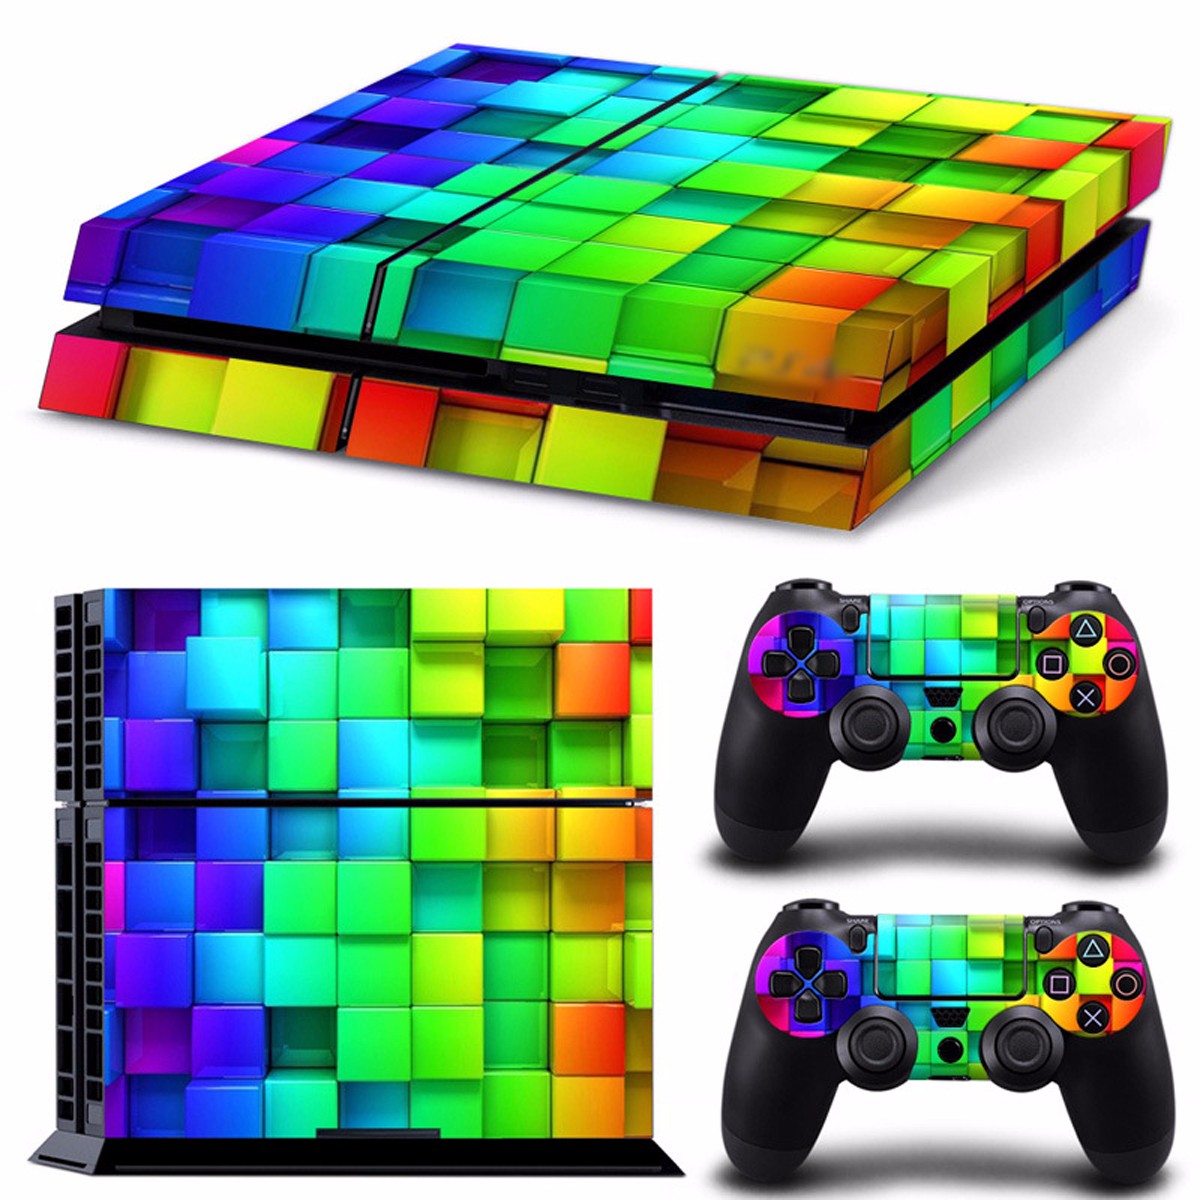 Lattice Style Vinyl Skin Decal For PS4 Play Station 4 Console and 2 Controllers 28